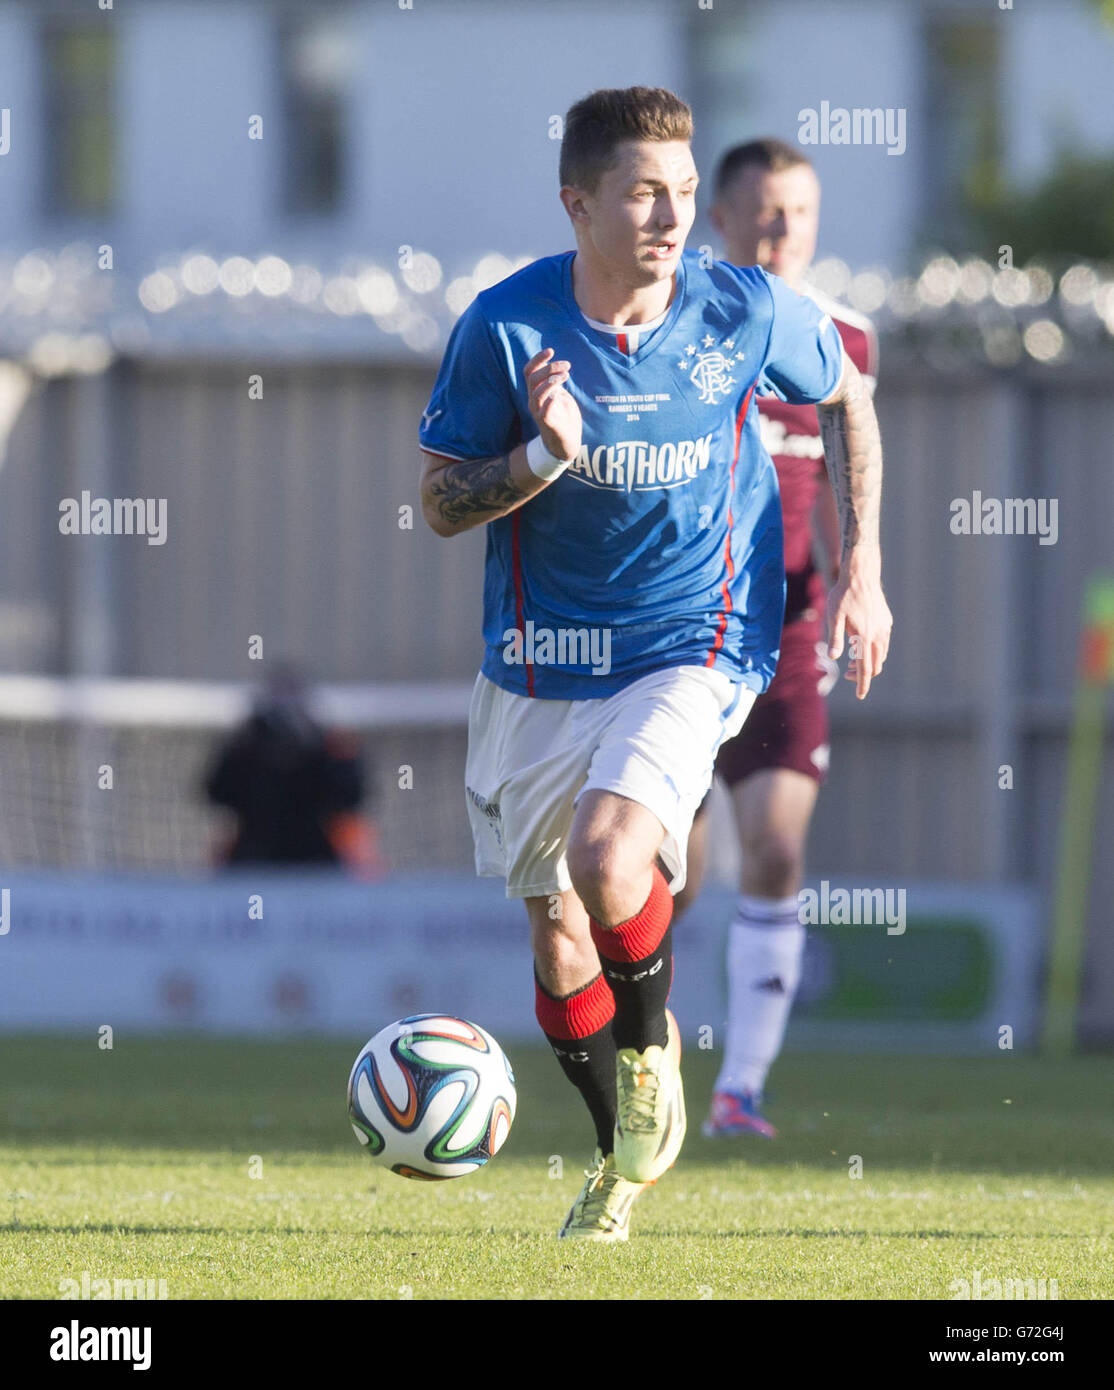 Soccer - SFA Youth Cup Final - Rangers v Hearts - St Mirren Park. Rangers' Daniel Stoney in action Stock Photo